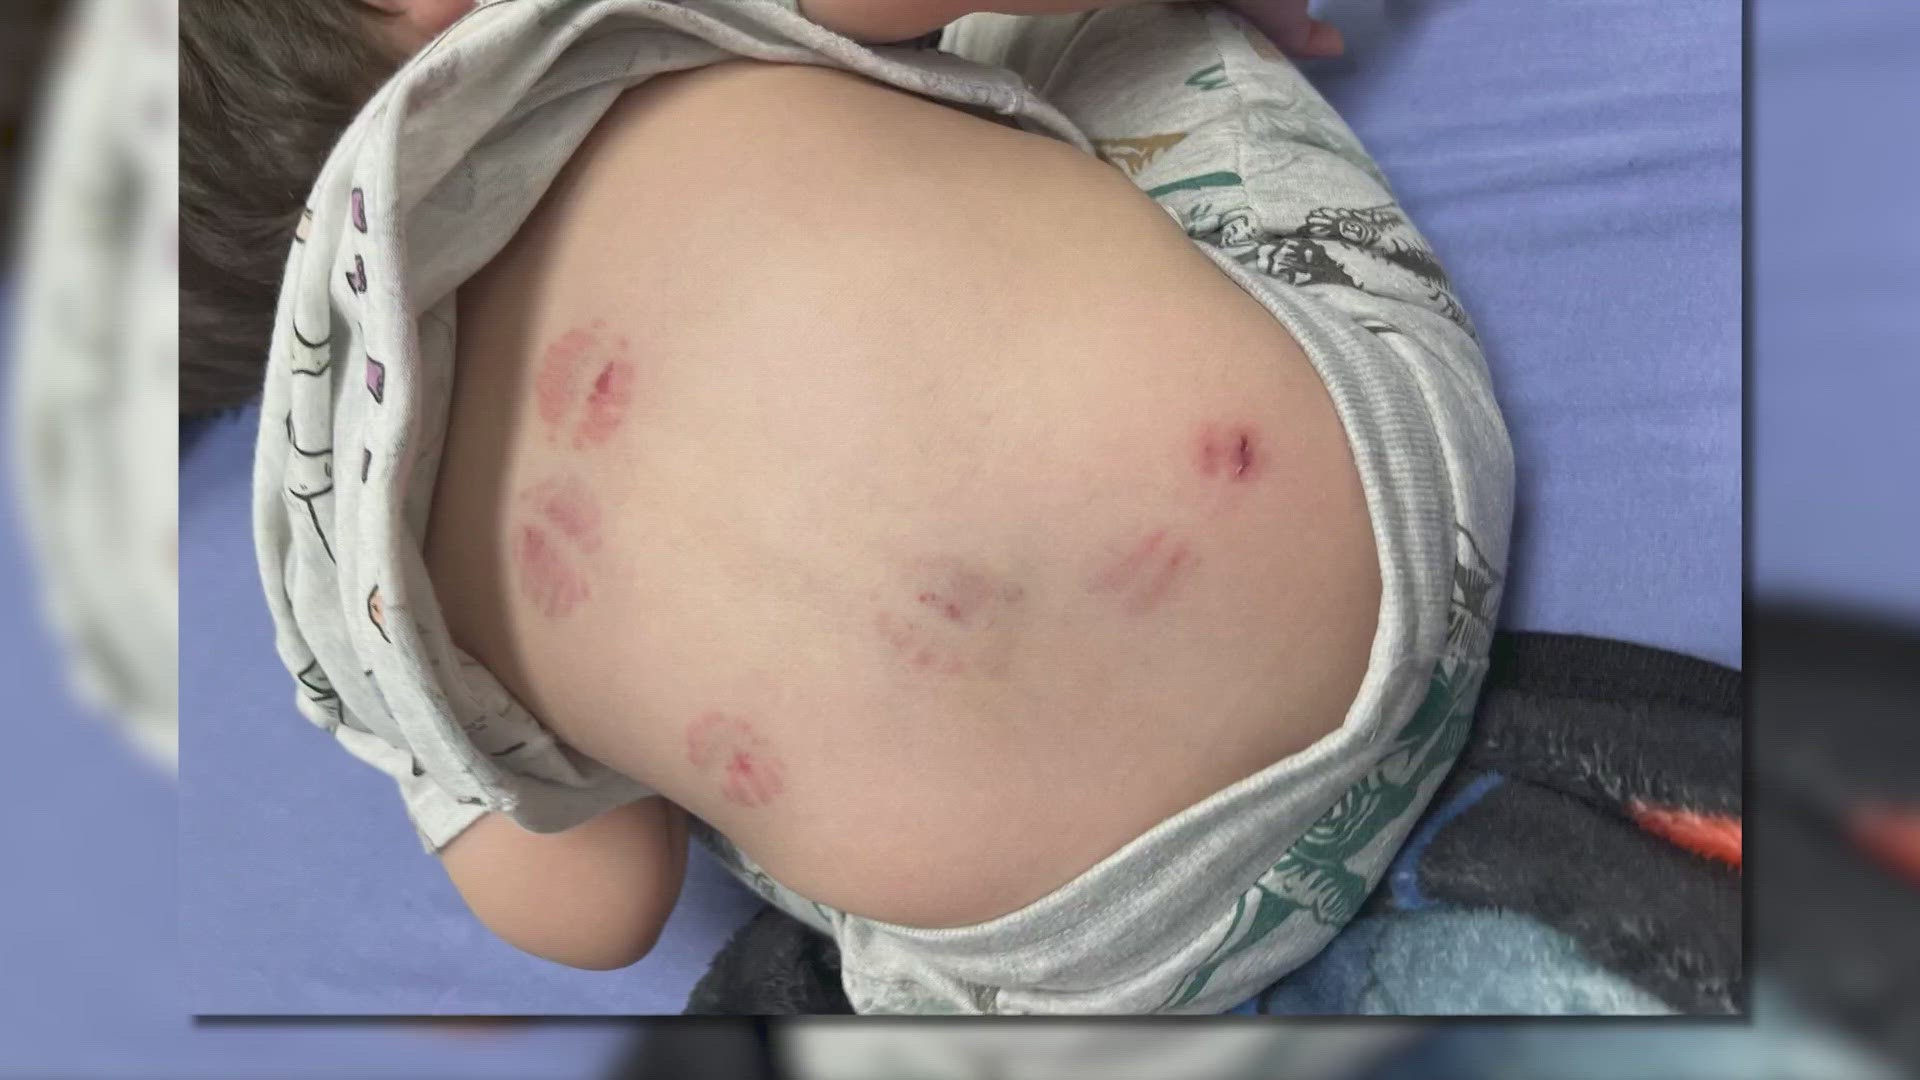 The father of Noah Rivas said he picked him up and noticed weird marks on his baby's arms. That night, Noah's mother found six more bite marks on his back.